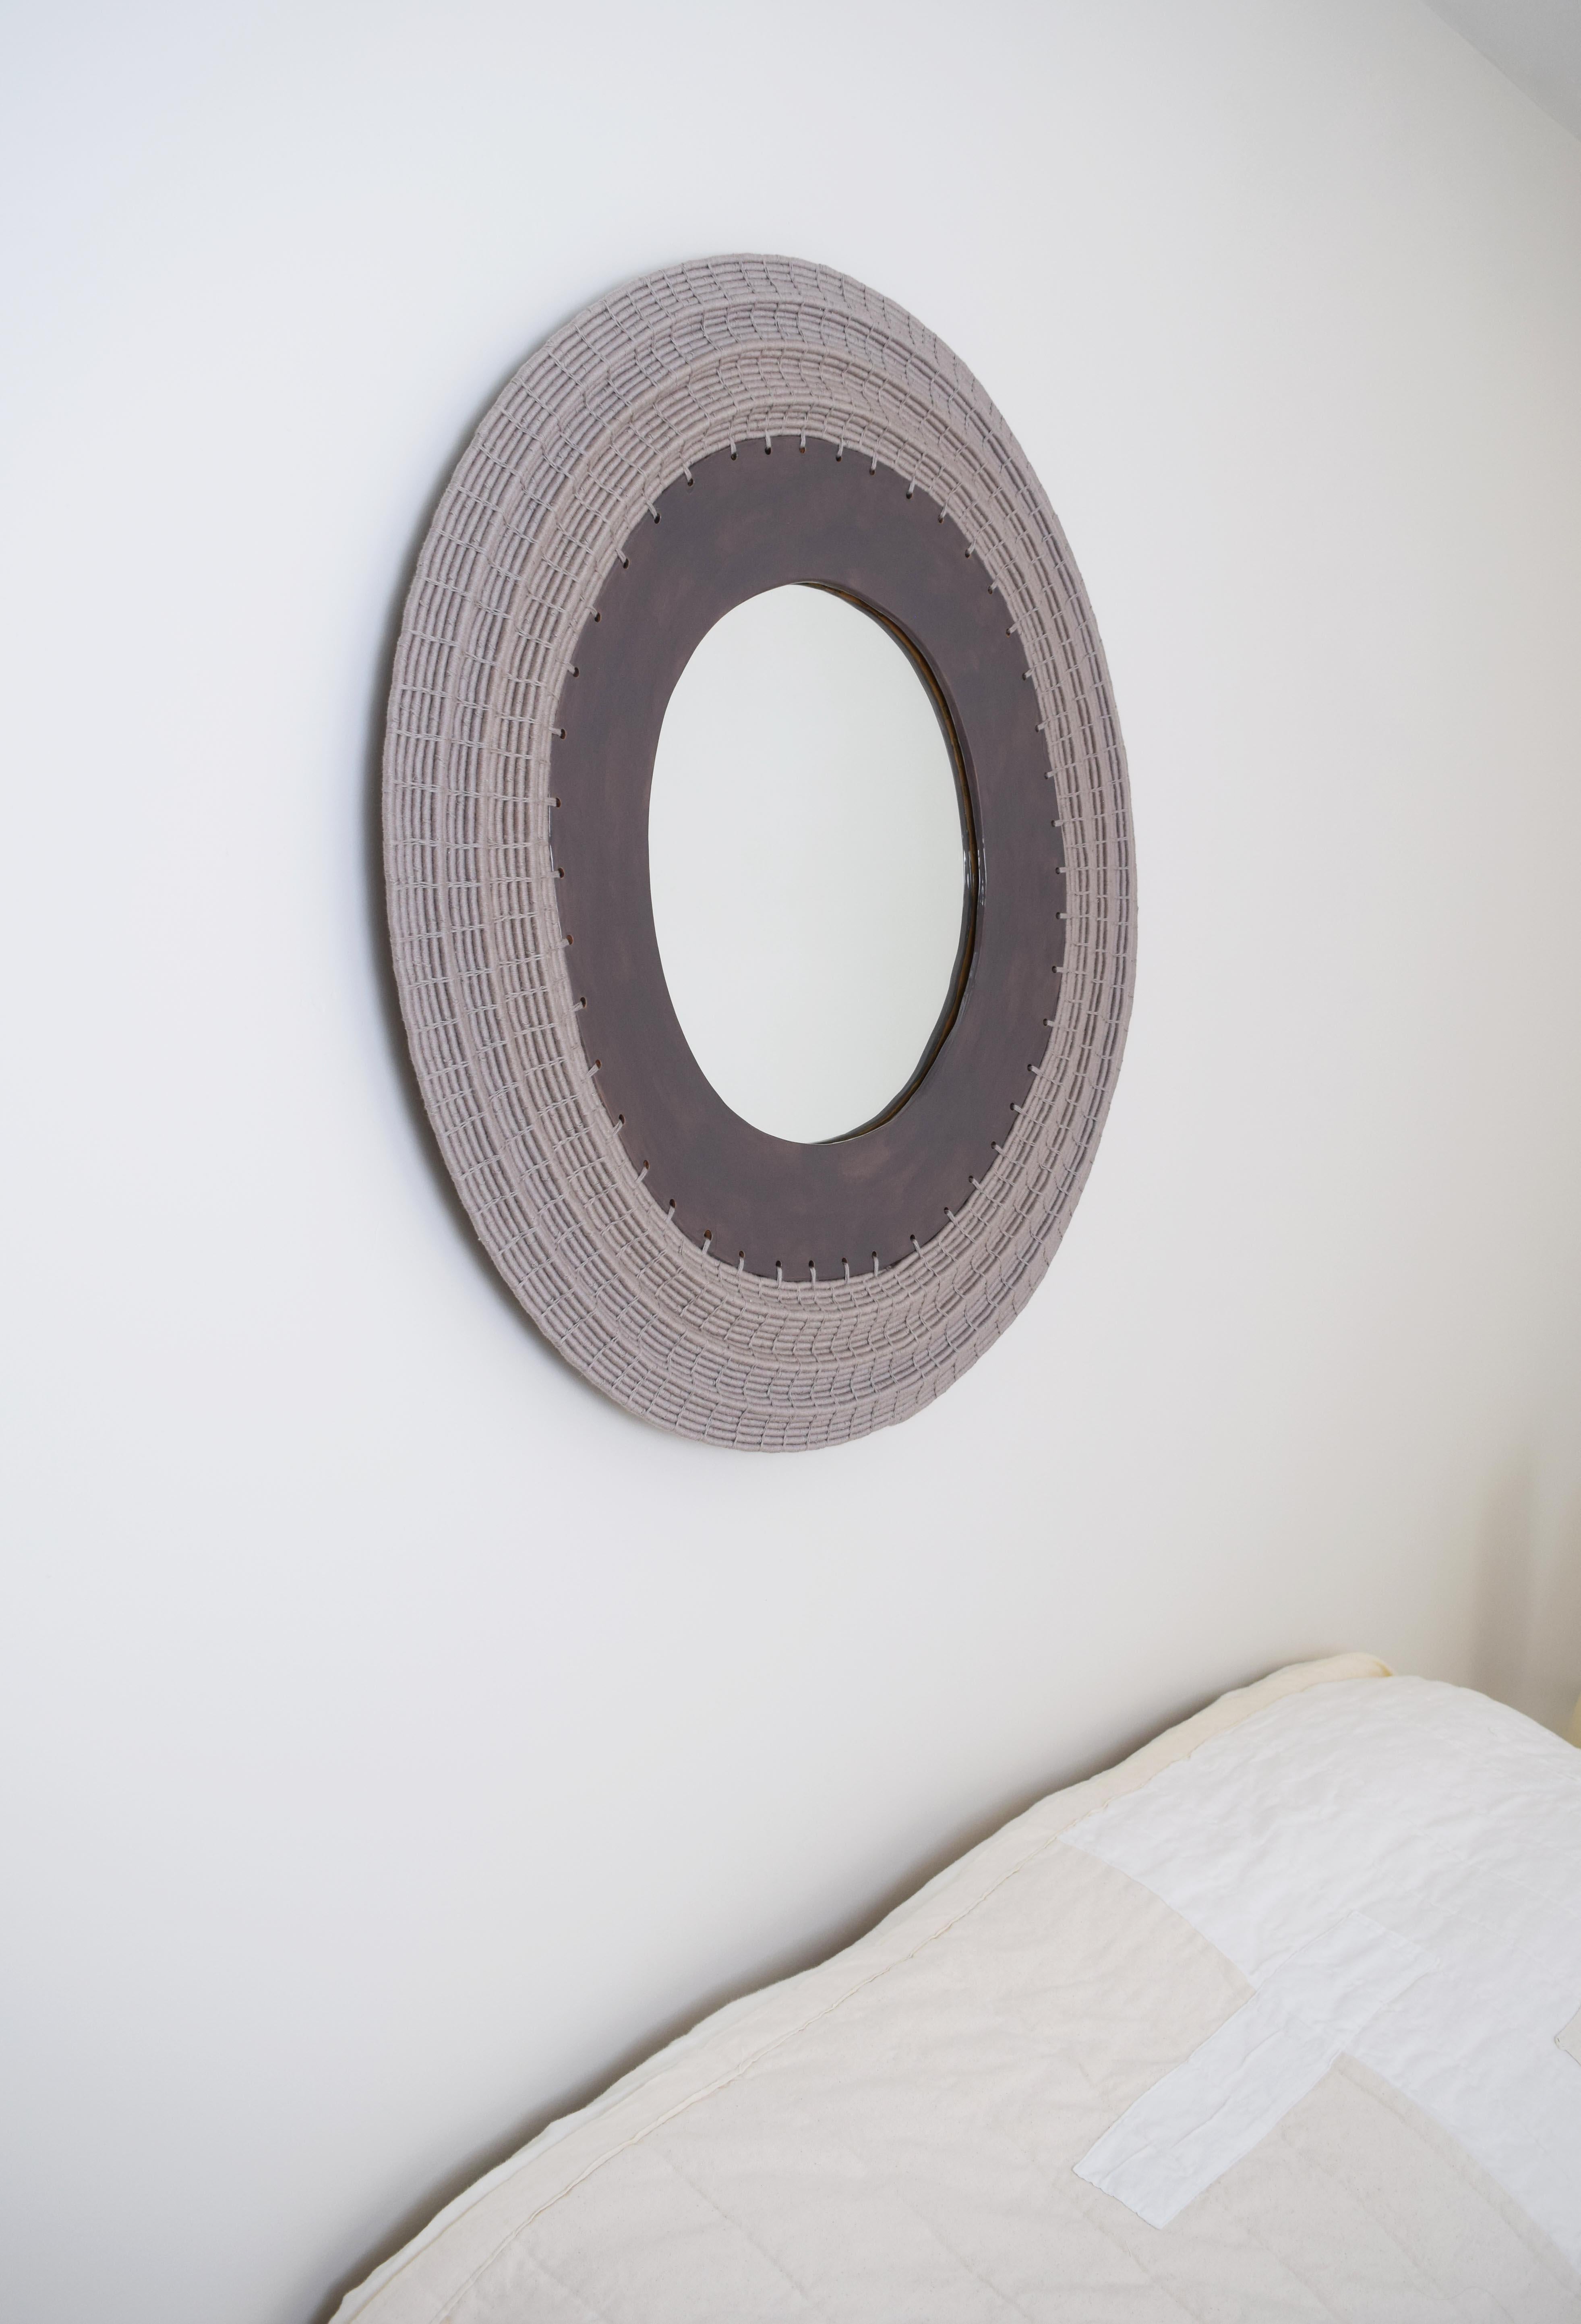 Hand-Crafted Handmade Mirror #602, Ceramic & Woven Cotton Surround, Custom Options For Sale